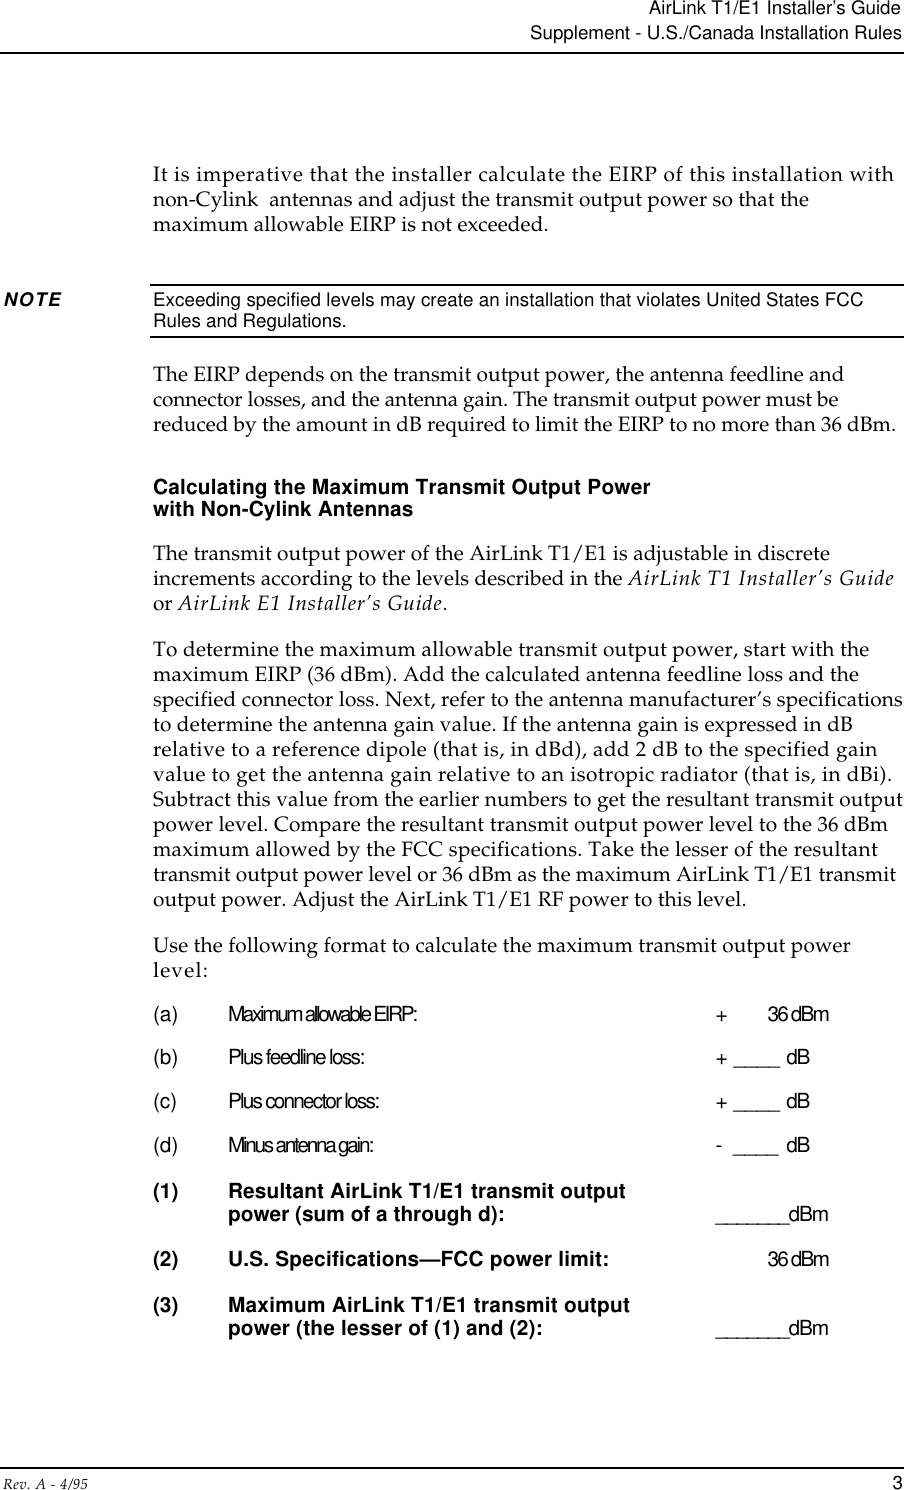 AirLink T1/E1 Installer’s GuideSupplement - U.S./Canada Installation RulesRev. A - 4/95 3It is imperative that the installer calculate the EIRP of this installation withnon-Cylink  antennas and adjust the transmit output power so that themaximum allowable EIRP is not exceeded.NOTE Exceeding specified levels may create an installation that violates United States FCCRules and Regulations.The EIRP depends on the transmit output power, the antenna feedline andconnector losses, and the antenna gain. The transmit output power must bereduced by the amount in dB required to limit the EIRP to no more than 36 dBm.Calculating the Maximum Transmit Output Powerwith Non-Cylink AntennasThe transmit output power of the AirLink T1/E1 is adjustable in discreteincrements according to the levels described in the AirLink T1 Installer’s Guideor AirLink E1 Installer’s Guide.To determine the maximum allowable transmit output power, start with themaximum EIRP (36 dBm). Add the calculated antenna feedline loss and thespecified connector loss. Next, refer to the antenna manufacturer’s specificationsto determine the antenna gain value. If the antenna gain is expressed in dBrelative to a reference dipole (that is, in dBd), add 2 dB to the specified gainvalue to get the antenna gain relative to an isotropic radiator (that is, in dBi).Subtract this value from the earlier numbers to get the resultant transmit outputpower level. Compare the resultant transmit output power level to the 36 dBmmaximum allowed by the FCC specifications. Take the lesser of the resultanttransmit output power level or 36 dBm as the maximum AirLink T1/E1 transmitoutput power. Adjust the AirLink T1/E1 RF power to this level.Use the following format to calculate the maximum transmit output powerlevel:(a) Maximum allowable EIRP: +  36 dBm(b) Plus feedline loss: + ____ dB(c) Plus connector loss: + ____ dB(d) Minus antenna gain: -  ____ dB(1) Resultant AirLink T1/E1 transmit outputpower (sum of a through d): _______dBm(2) U.S. Specifications—FCC power limit: 36 dBm(3) Maximum AirLink T1/E1 transmit outputpower (the lesser of (1) and (2): _______dBm